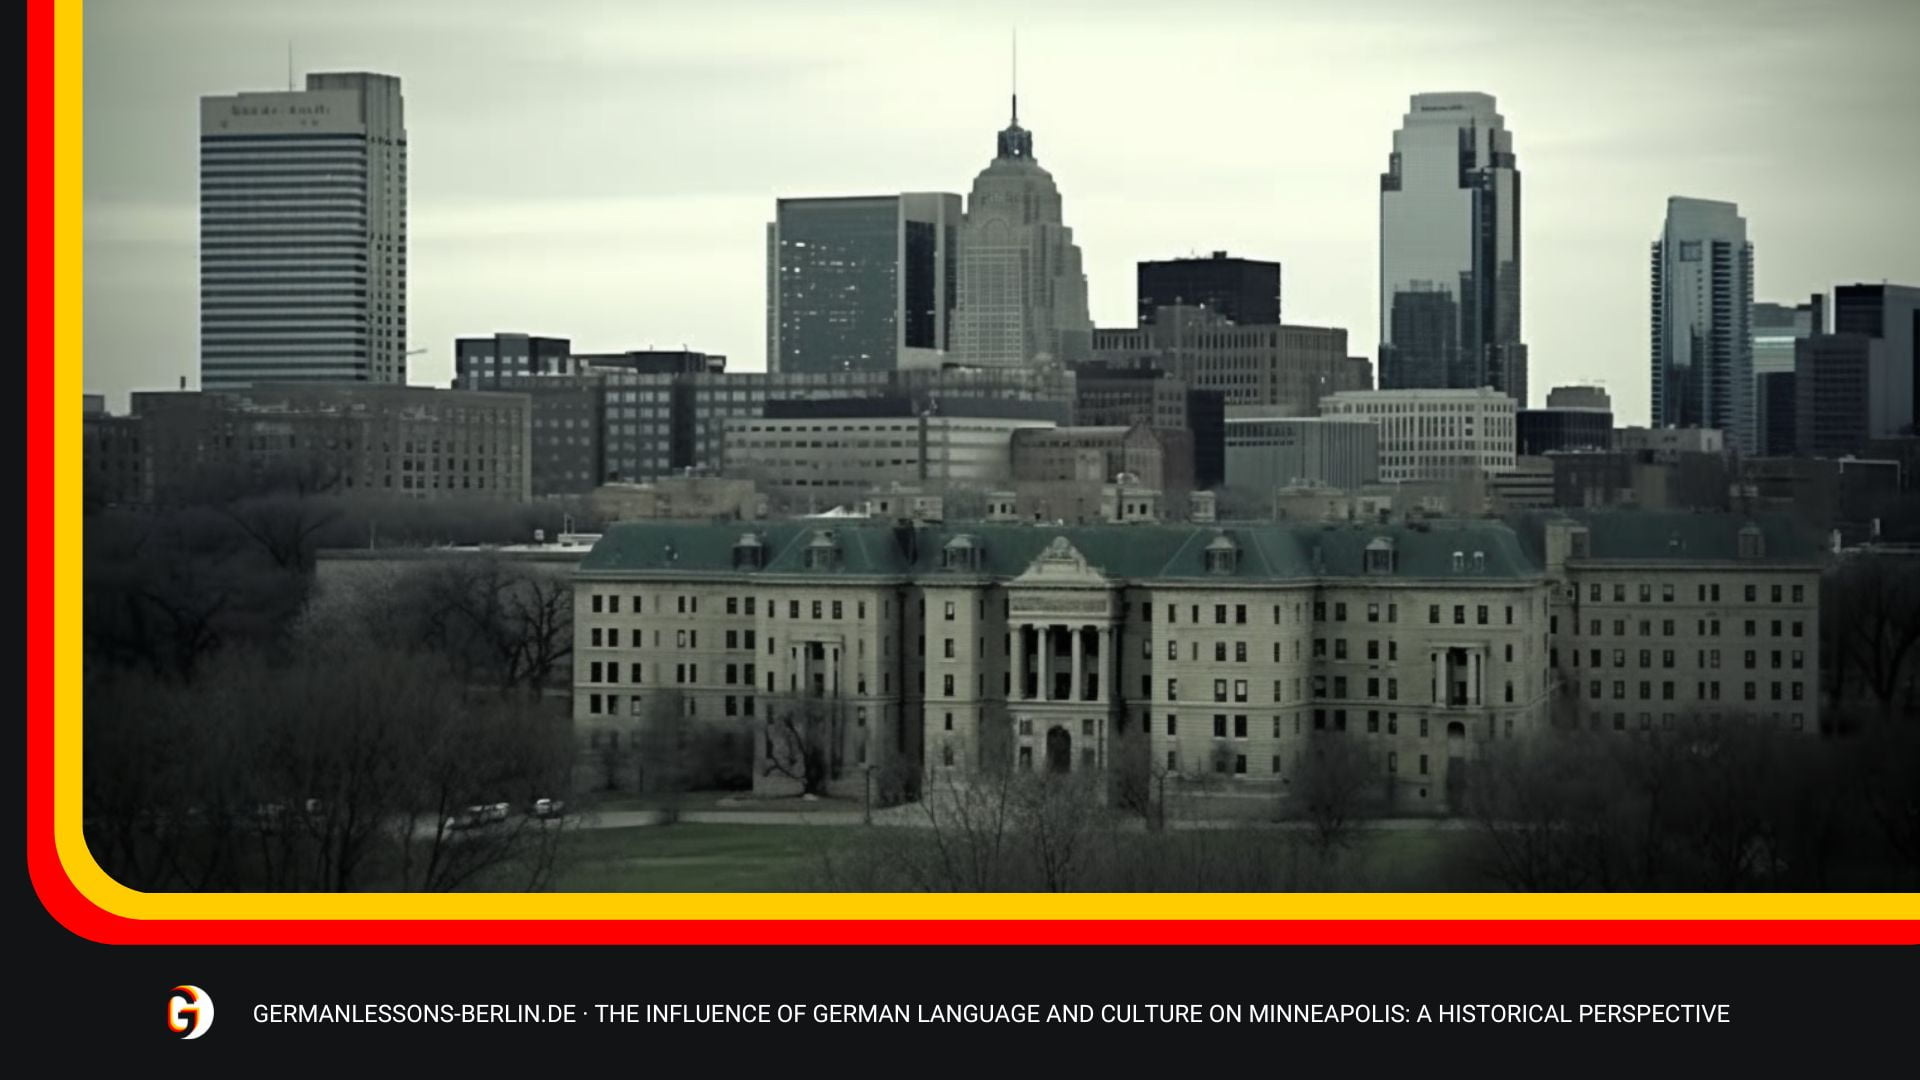 The Influence Of German Language And Culture On Minneapolis: A Historical Perspective